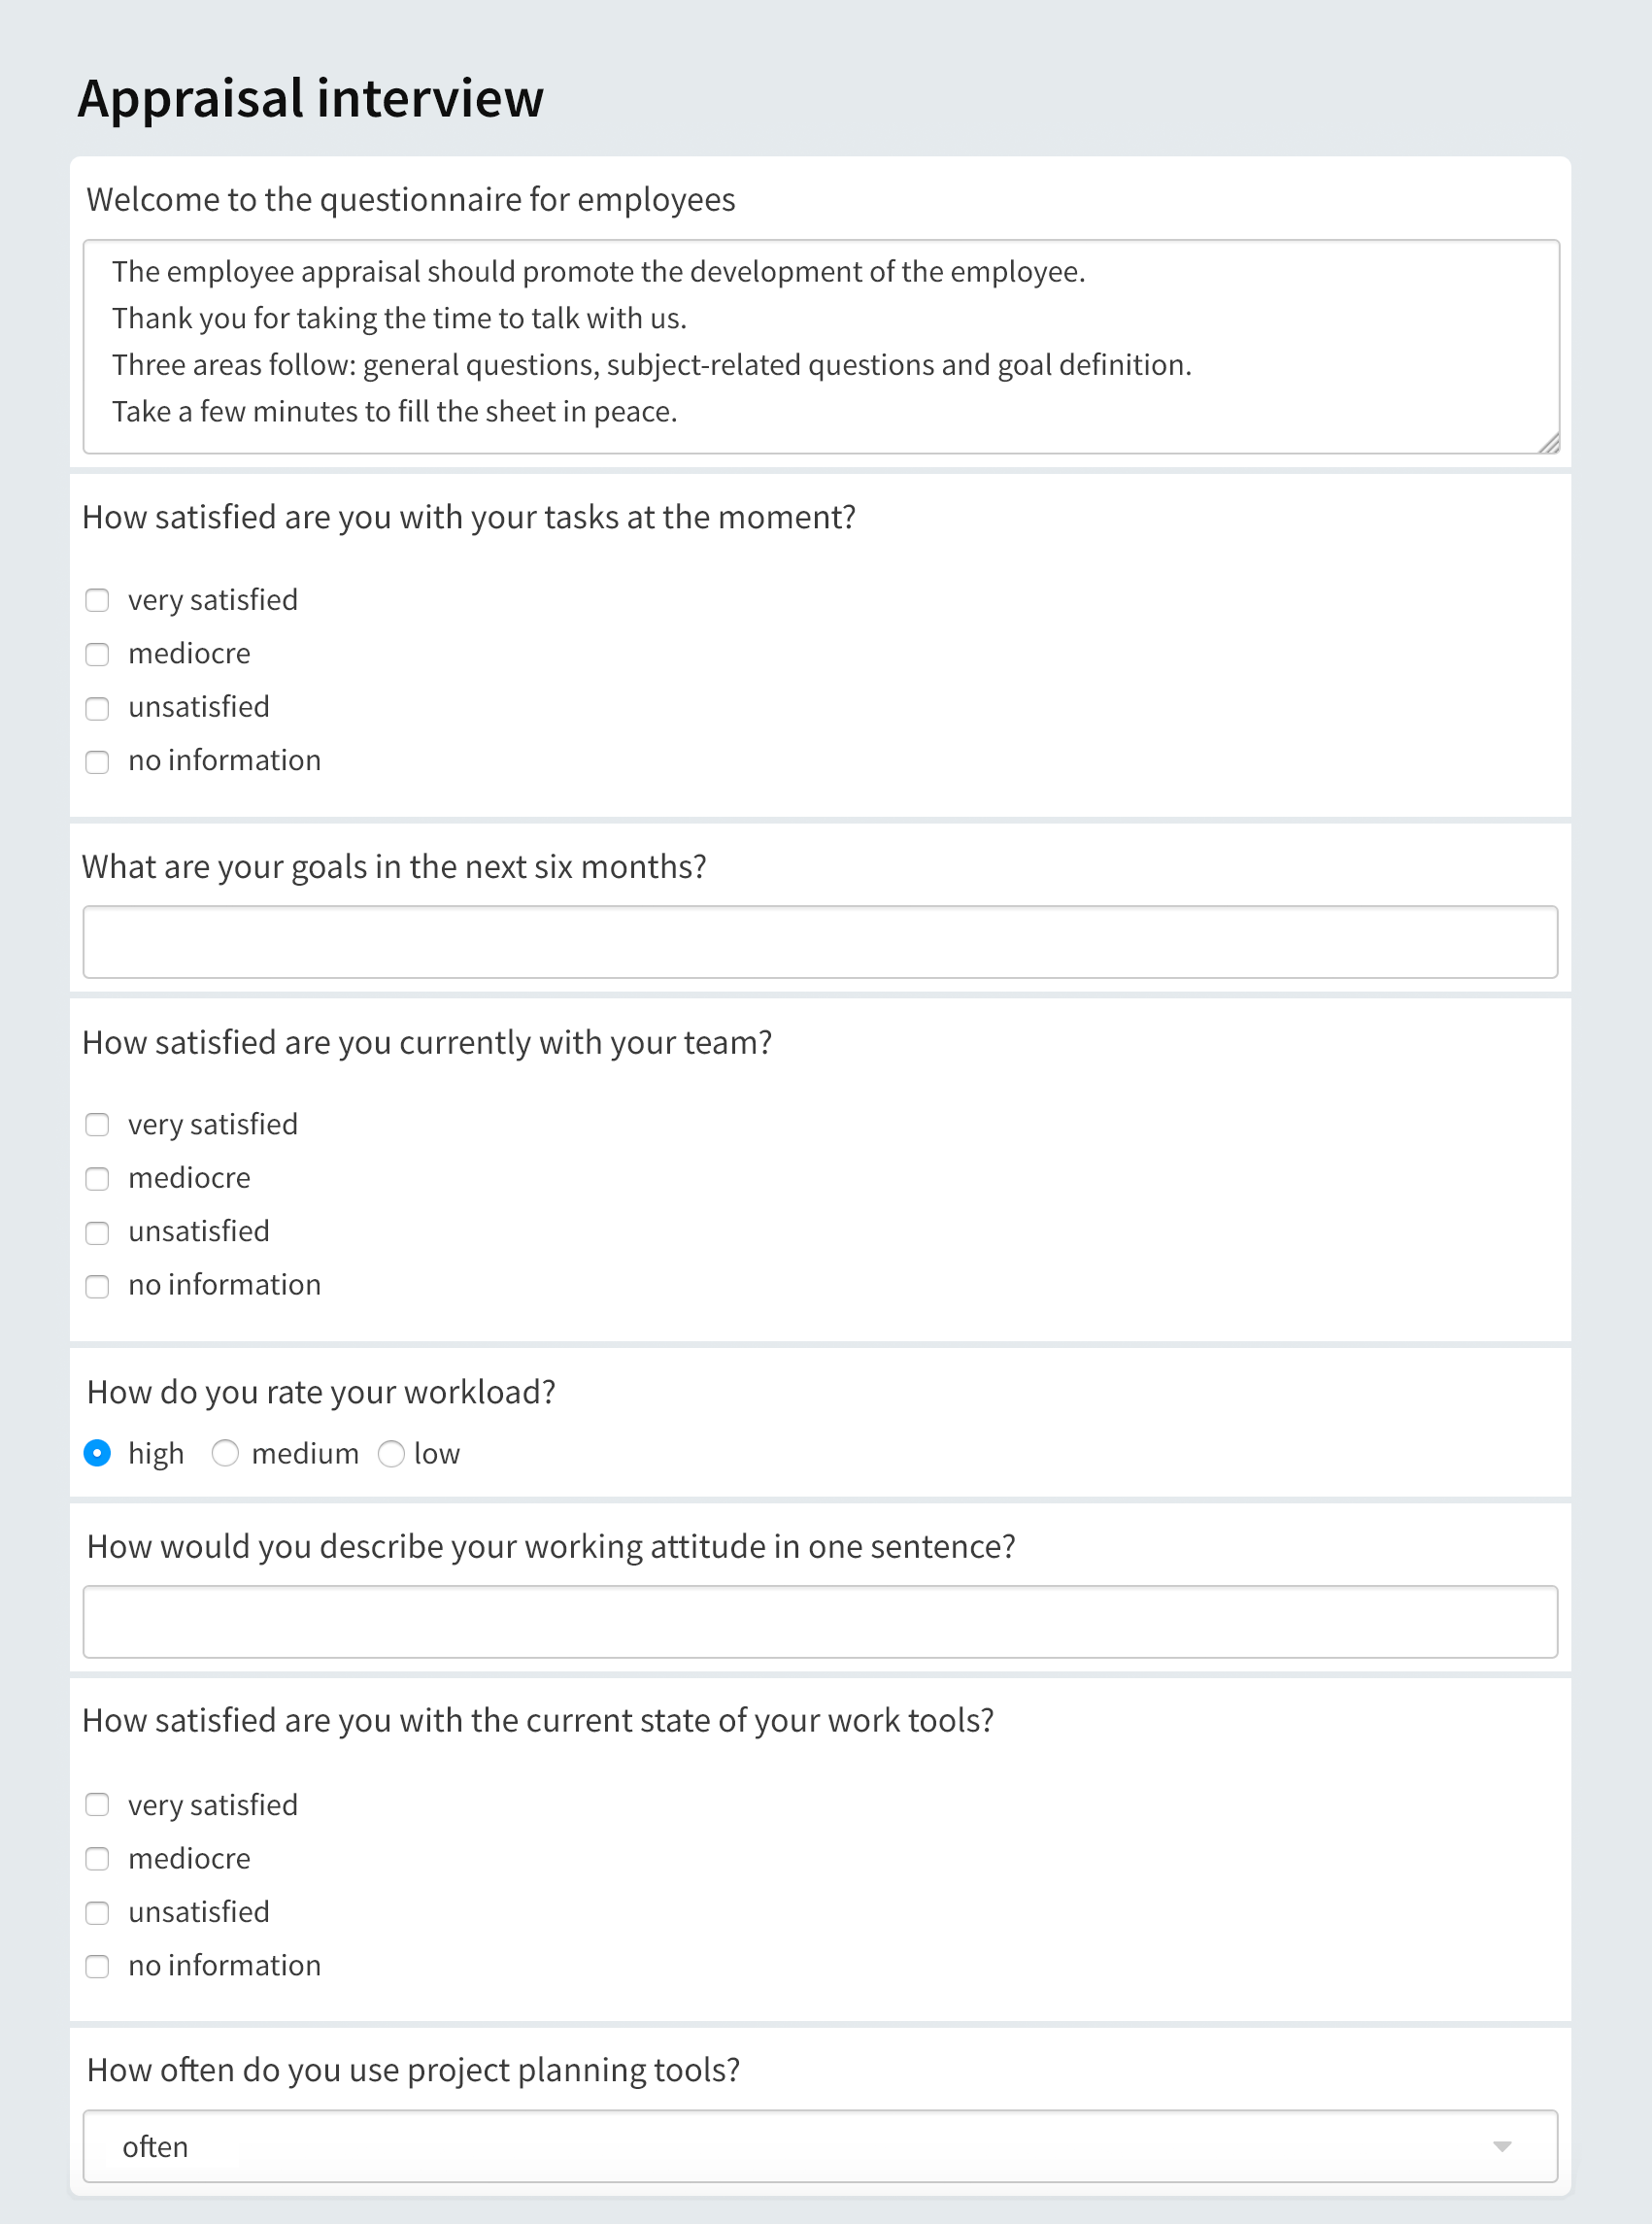 View of an employee questionnaire